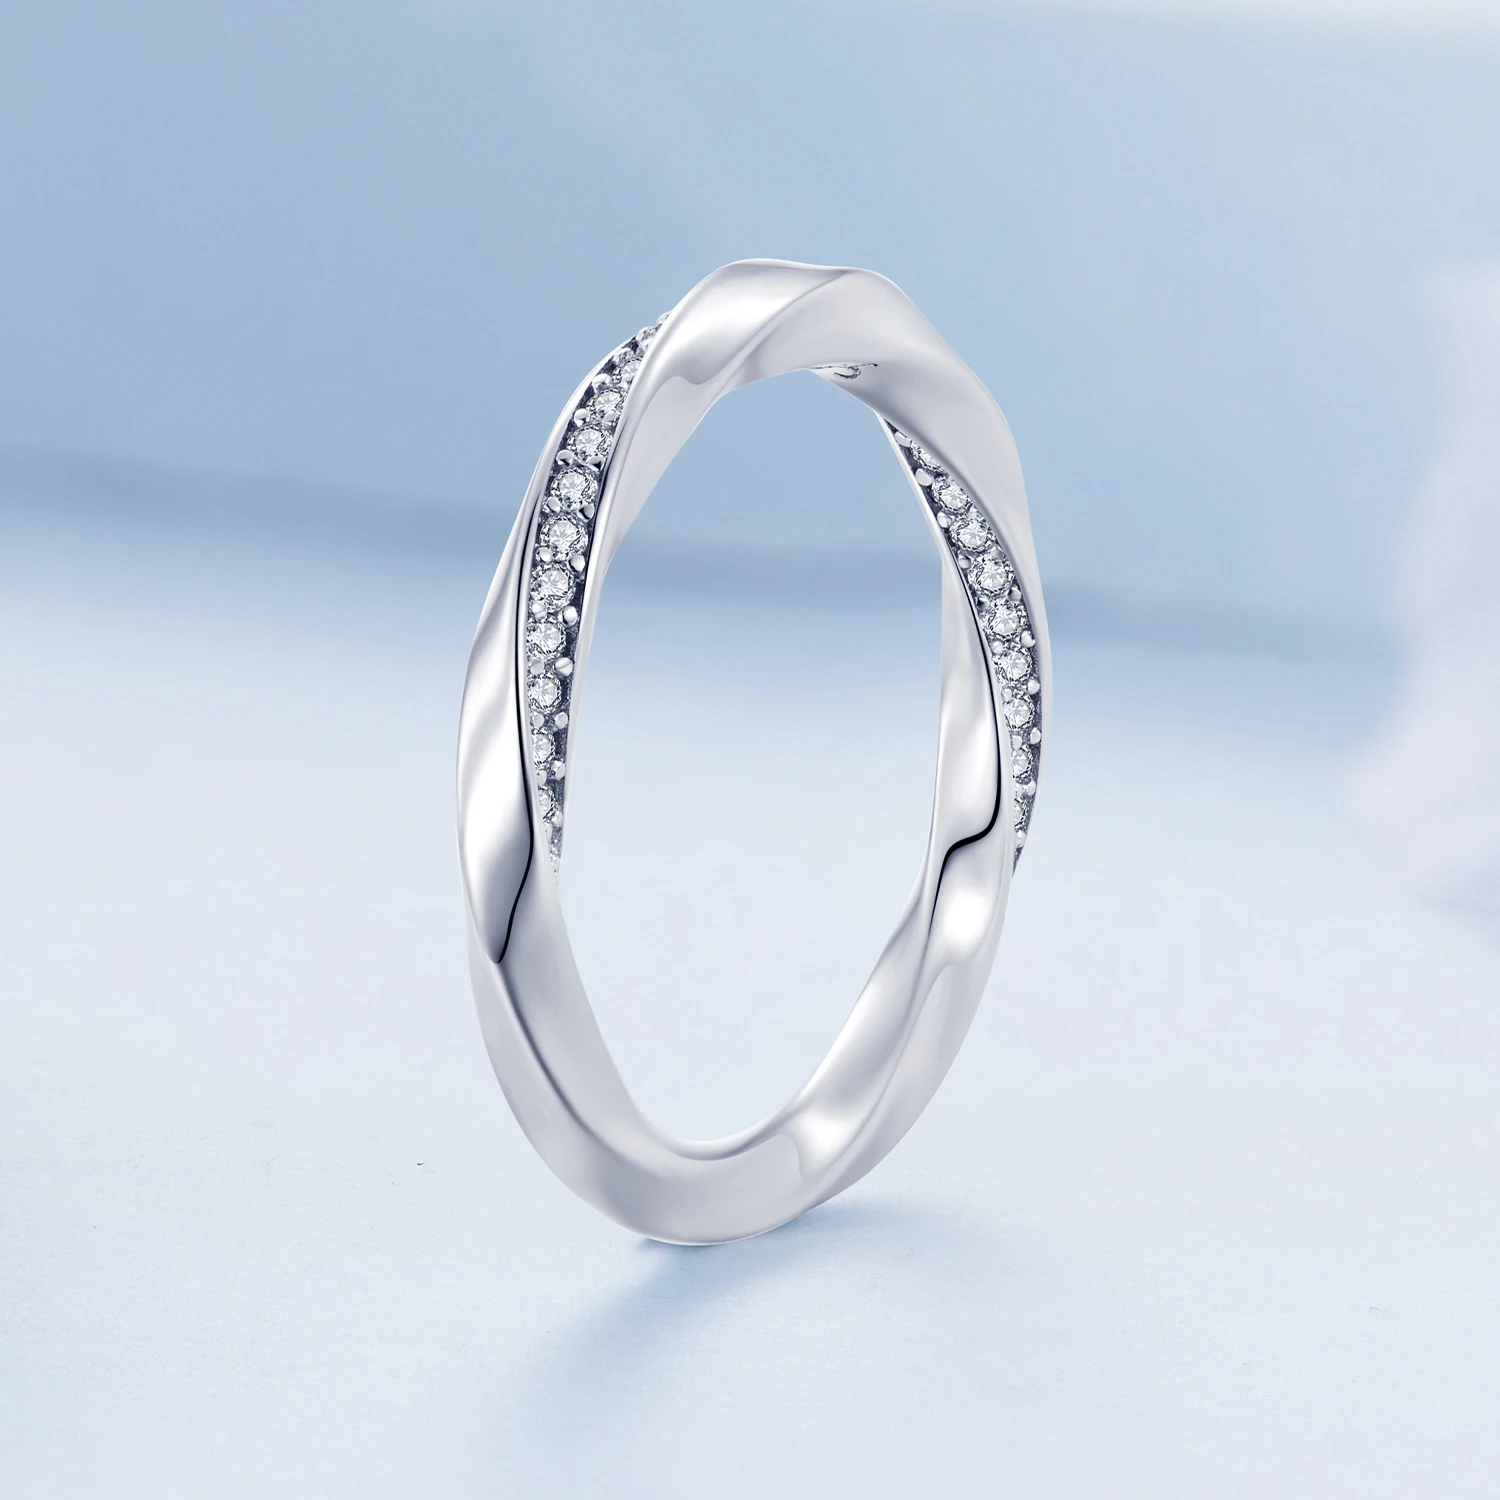 

S925 Sterling Silver Plated White Gold Cubic Zirconia Twisted Mobius Forever Love Ring Women's,Engagement Wedding Rings